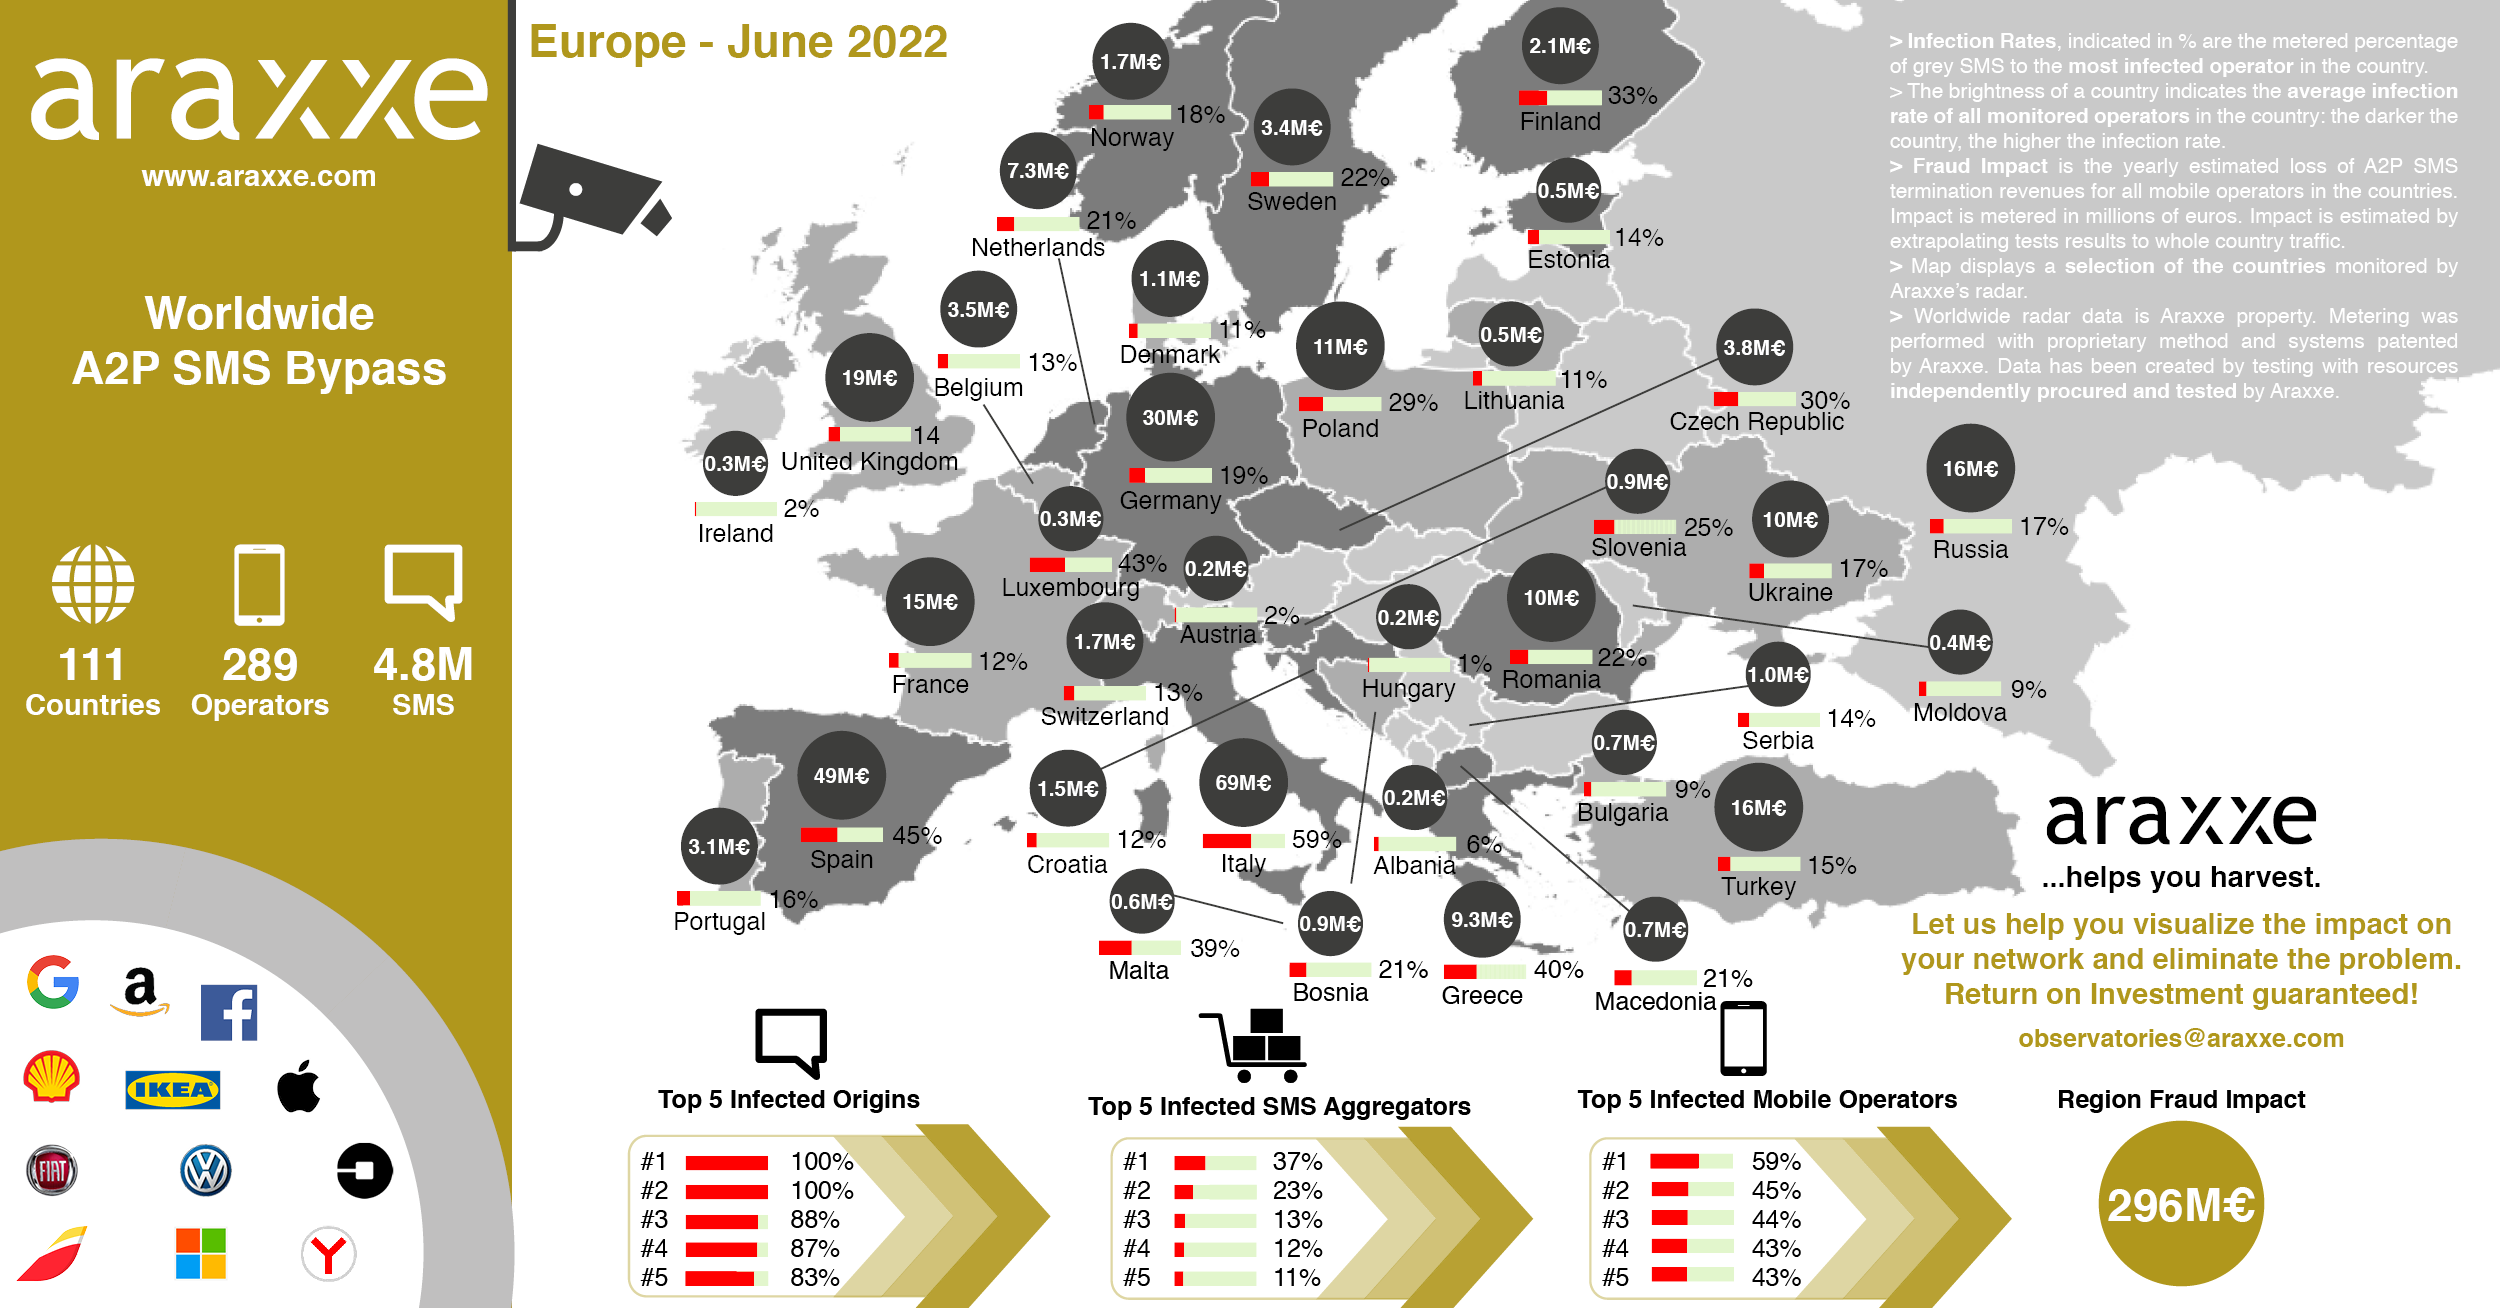 A2P Europe June 2022